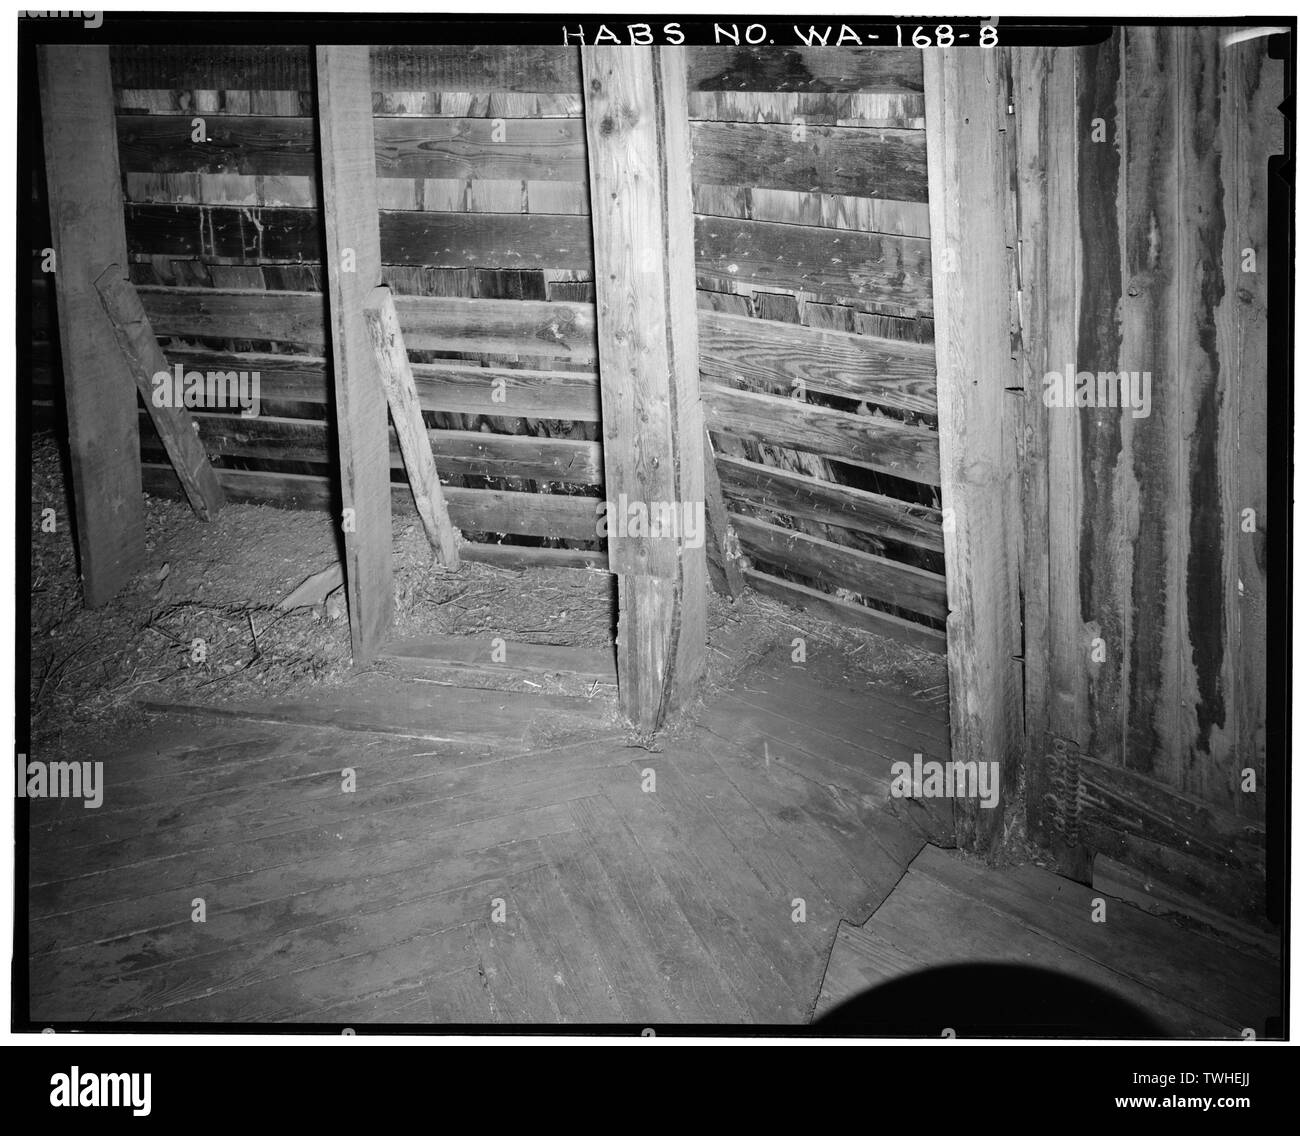 SECOND FLOOR INTERIOR, DETAIL OF ROOF FRAMING AND FLOOR - T. A. Leonard Barn, Old Moscow Highway, Pullman, Whitman County, WA; Cline, James H; Rudd, J William, project manager; Washington State University, School of Architecture, sponsor; Nys, Steven Eric, delineator; Burger, David M, delineator Stock Photo